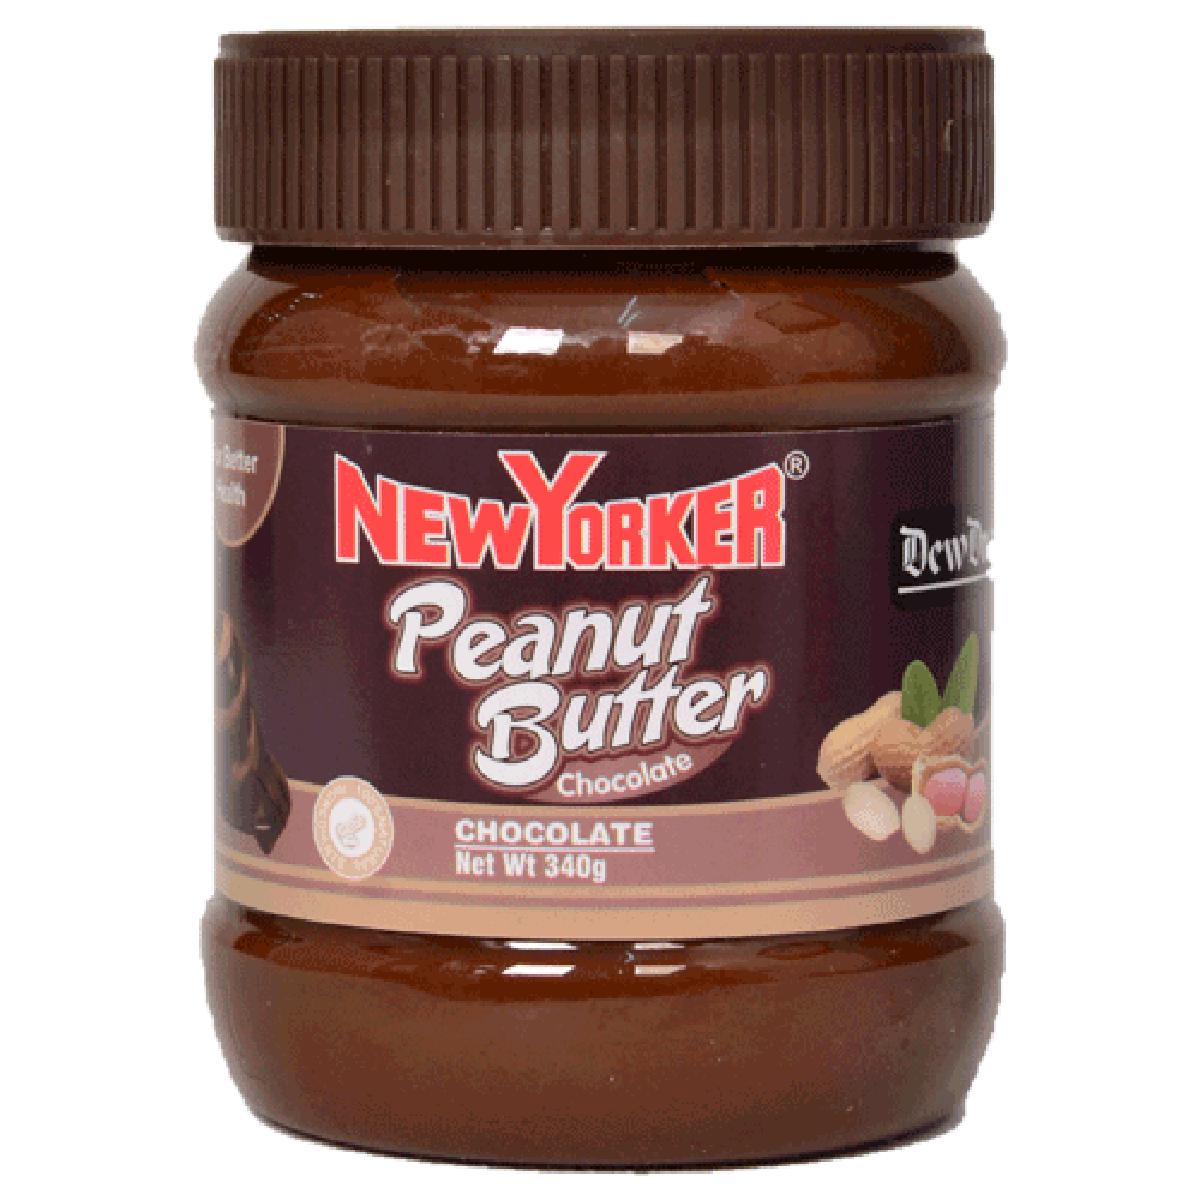 New Yorker - Peanut Butter 340g - Chocolate - Pack Of 12